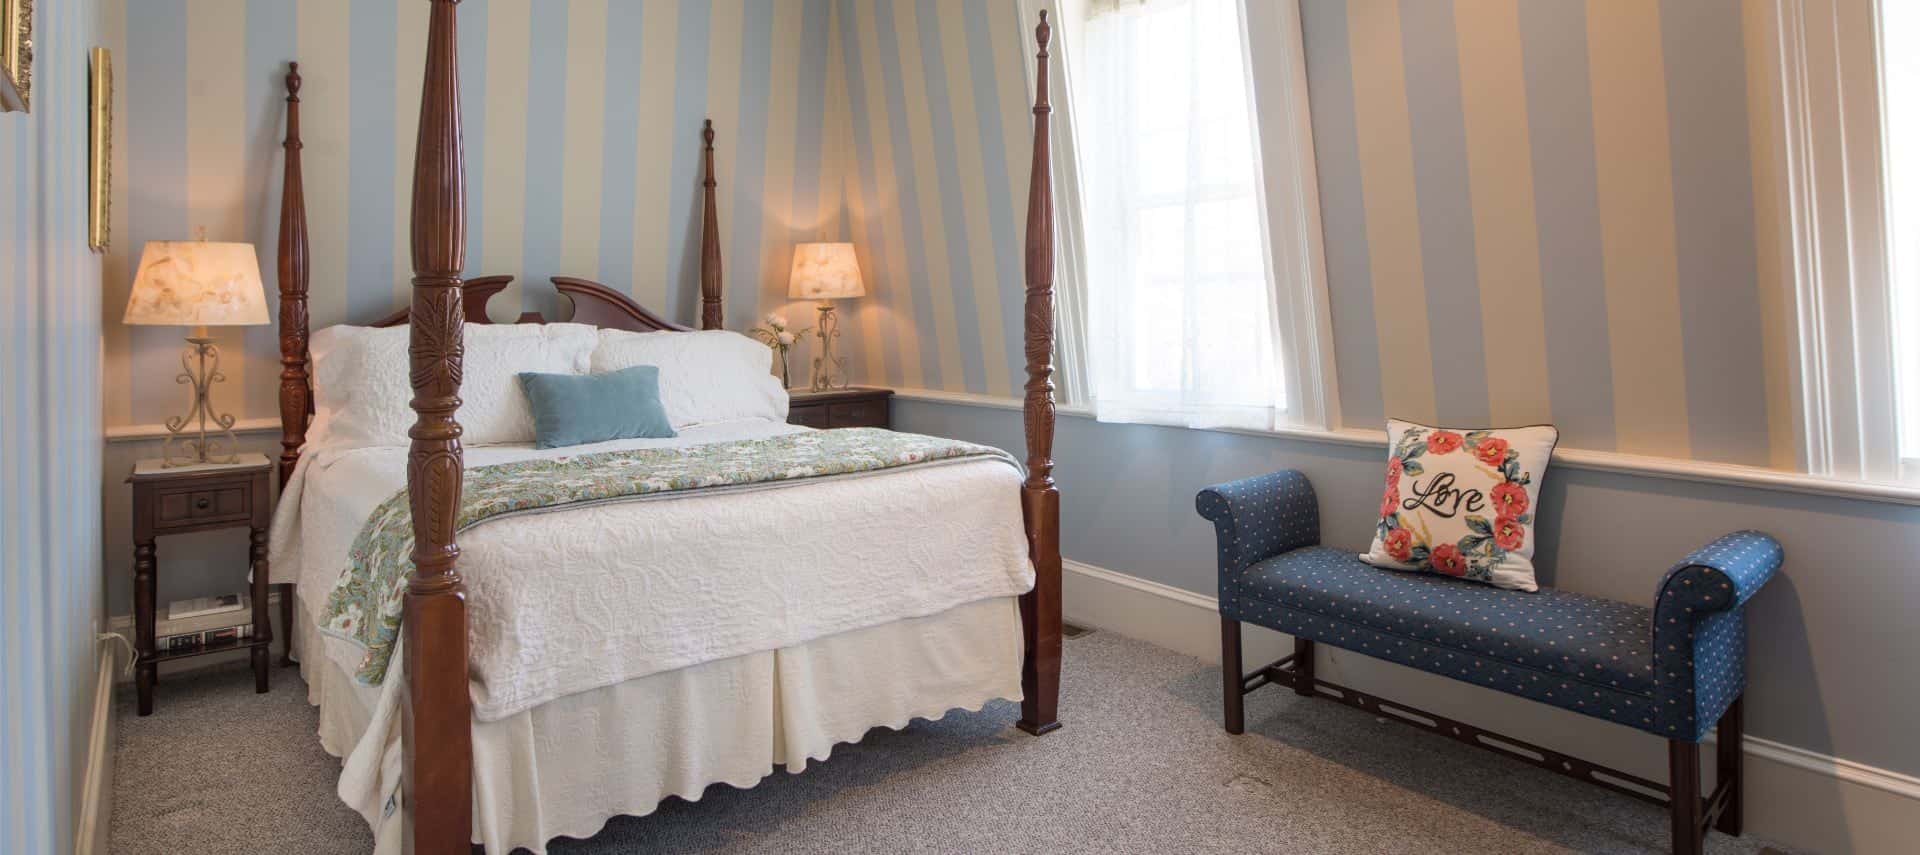 Bedroom with ornate dark wood four post bed with white bedding, wooden nightstands with iron lamps, blue and tan striped wallpaper, and light gray carpeting